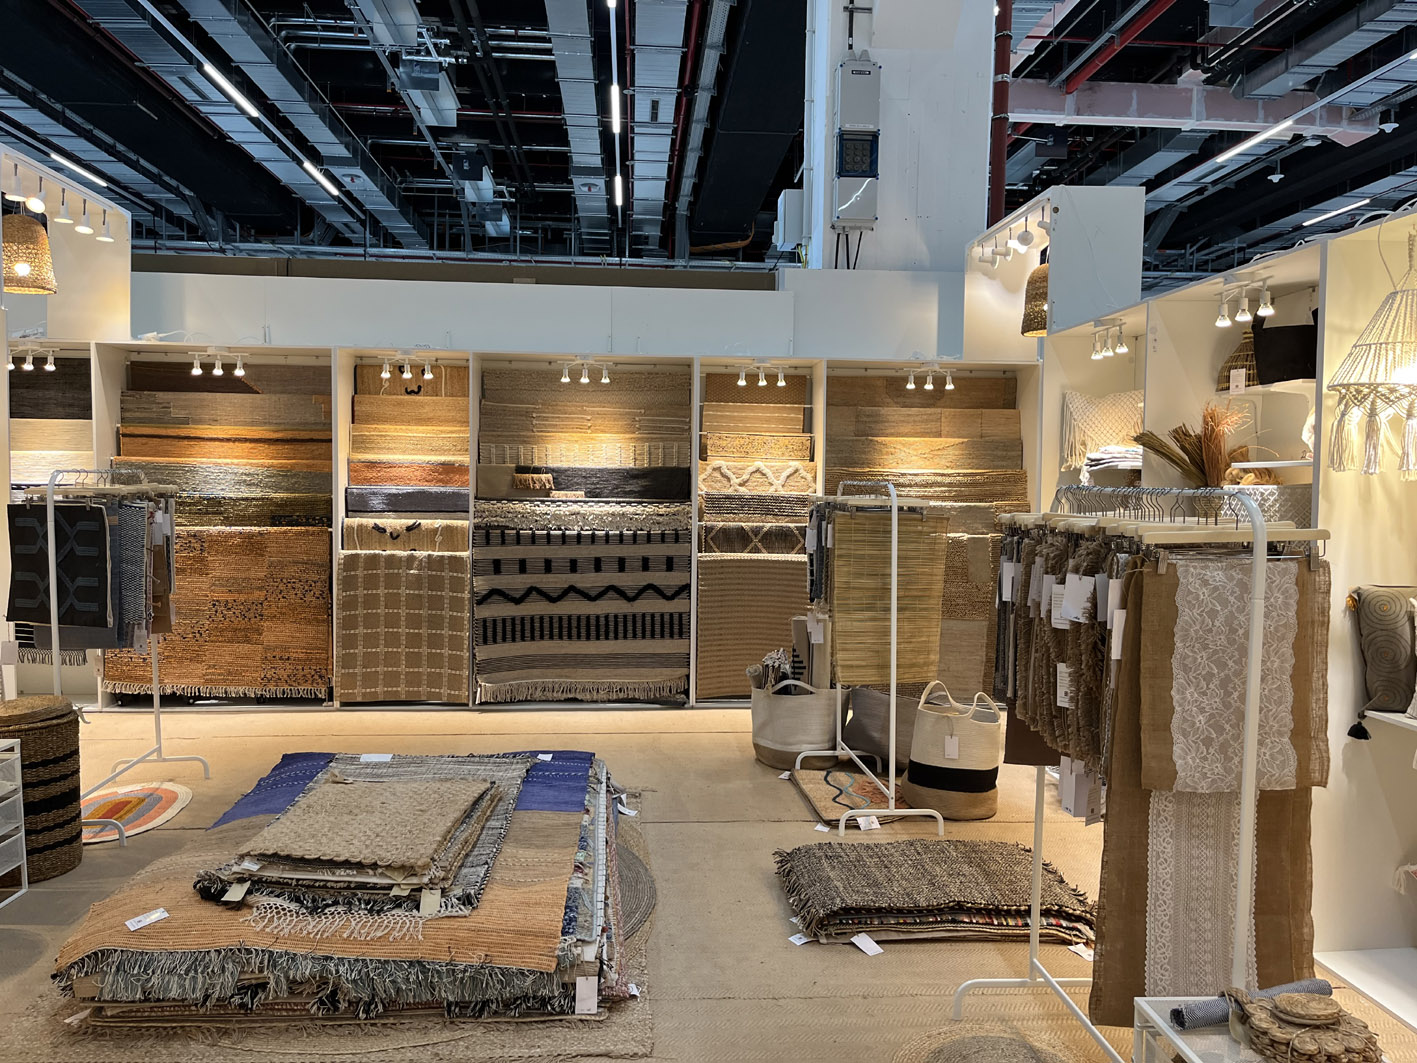 Karupannya Rangpur put together its own stand with components from the local IKEA and will reuse it at future Heimtextil shows. © A.Wilson